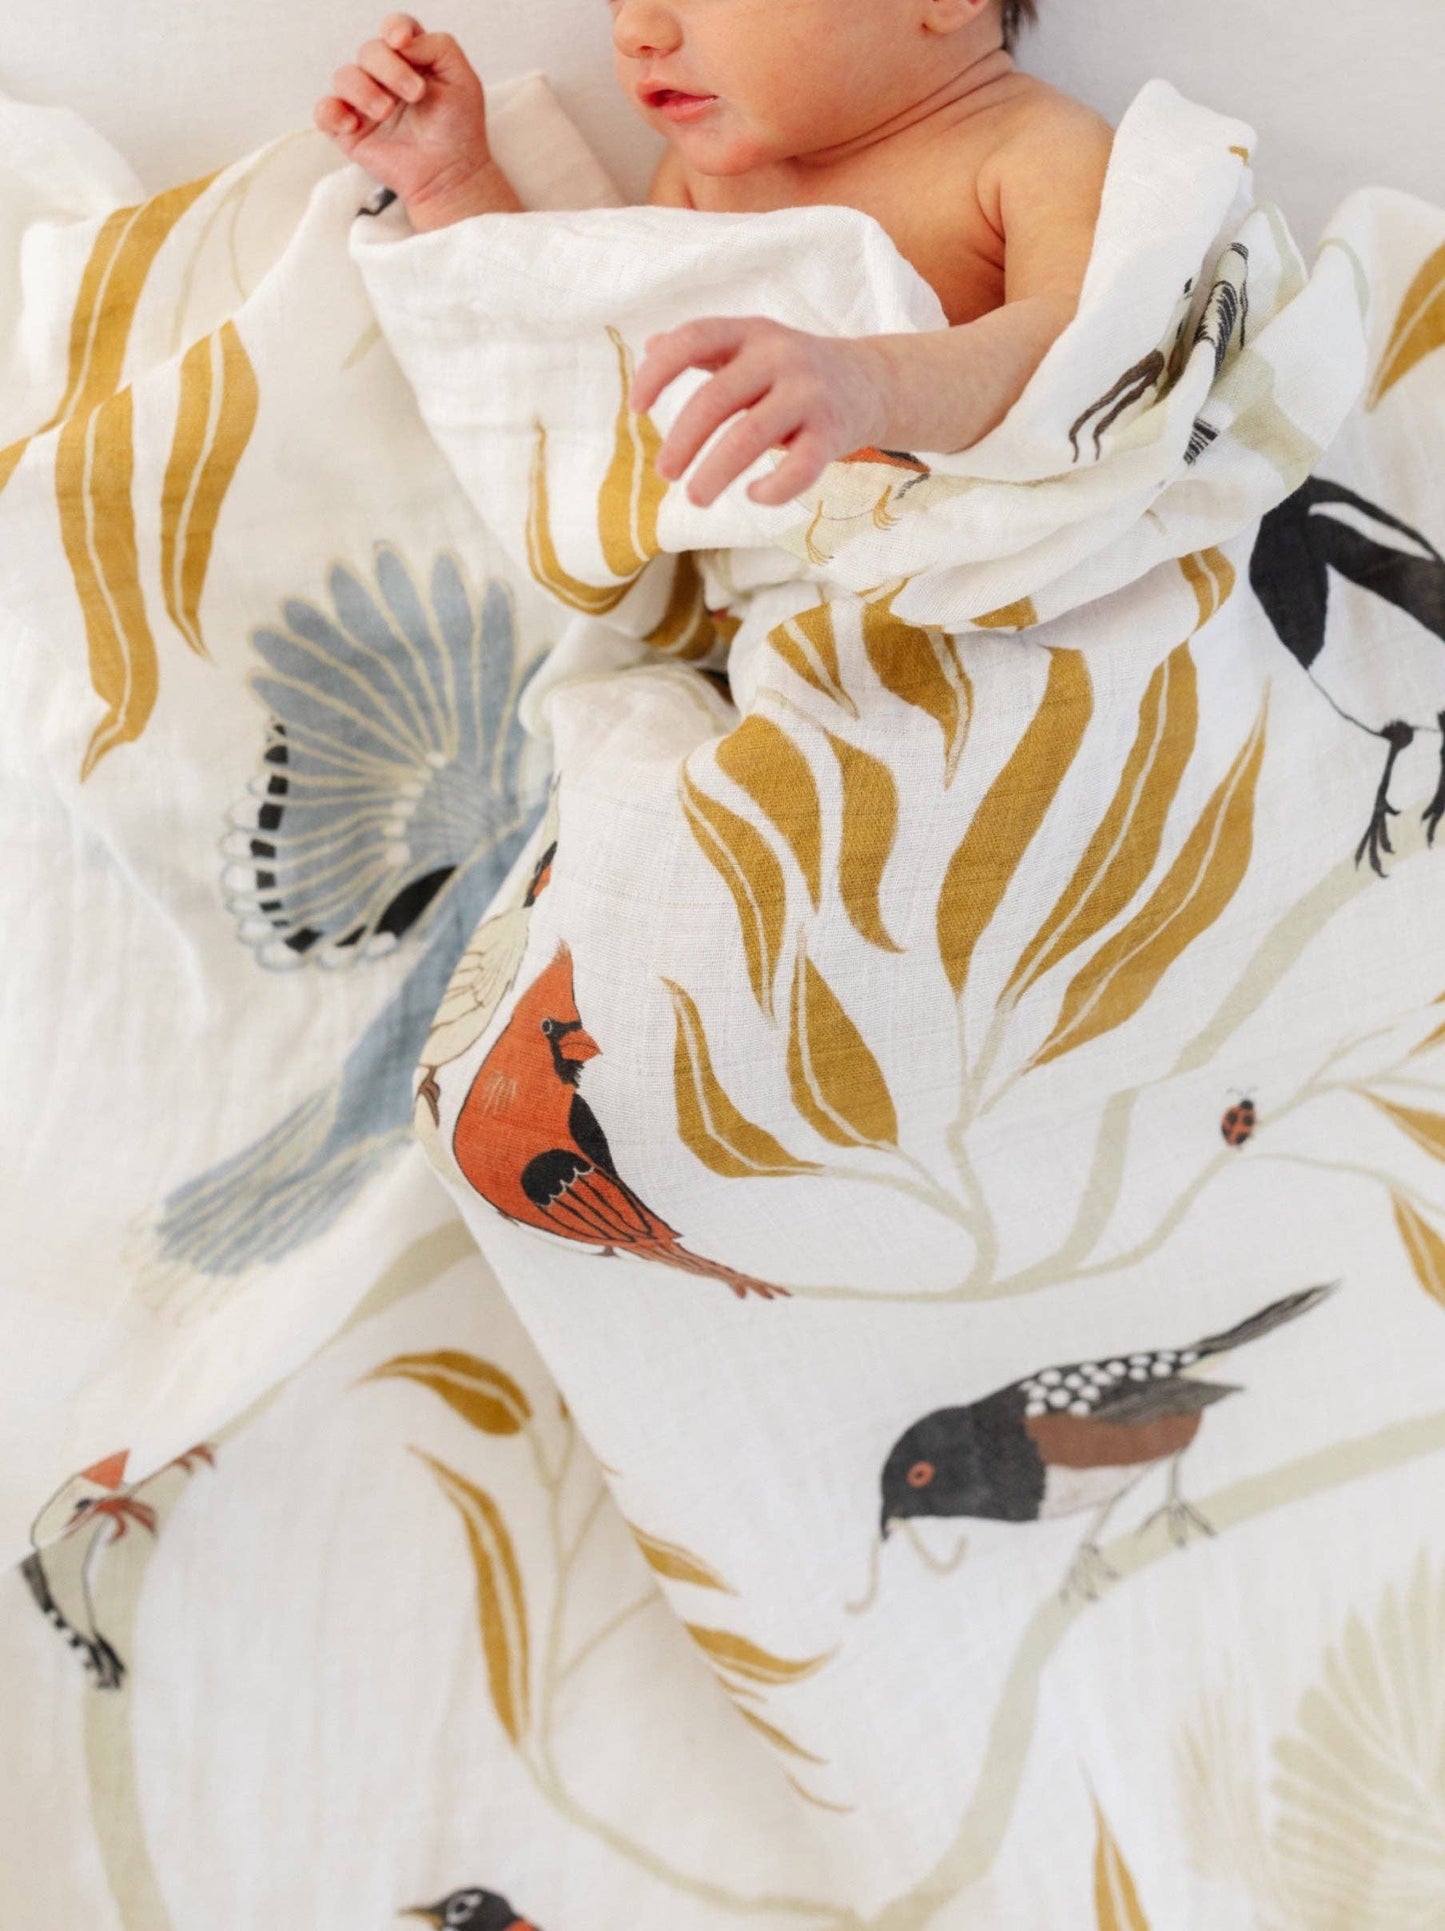 For the Birds Swaddle